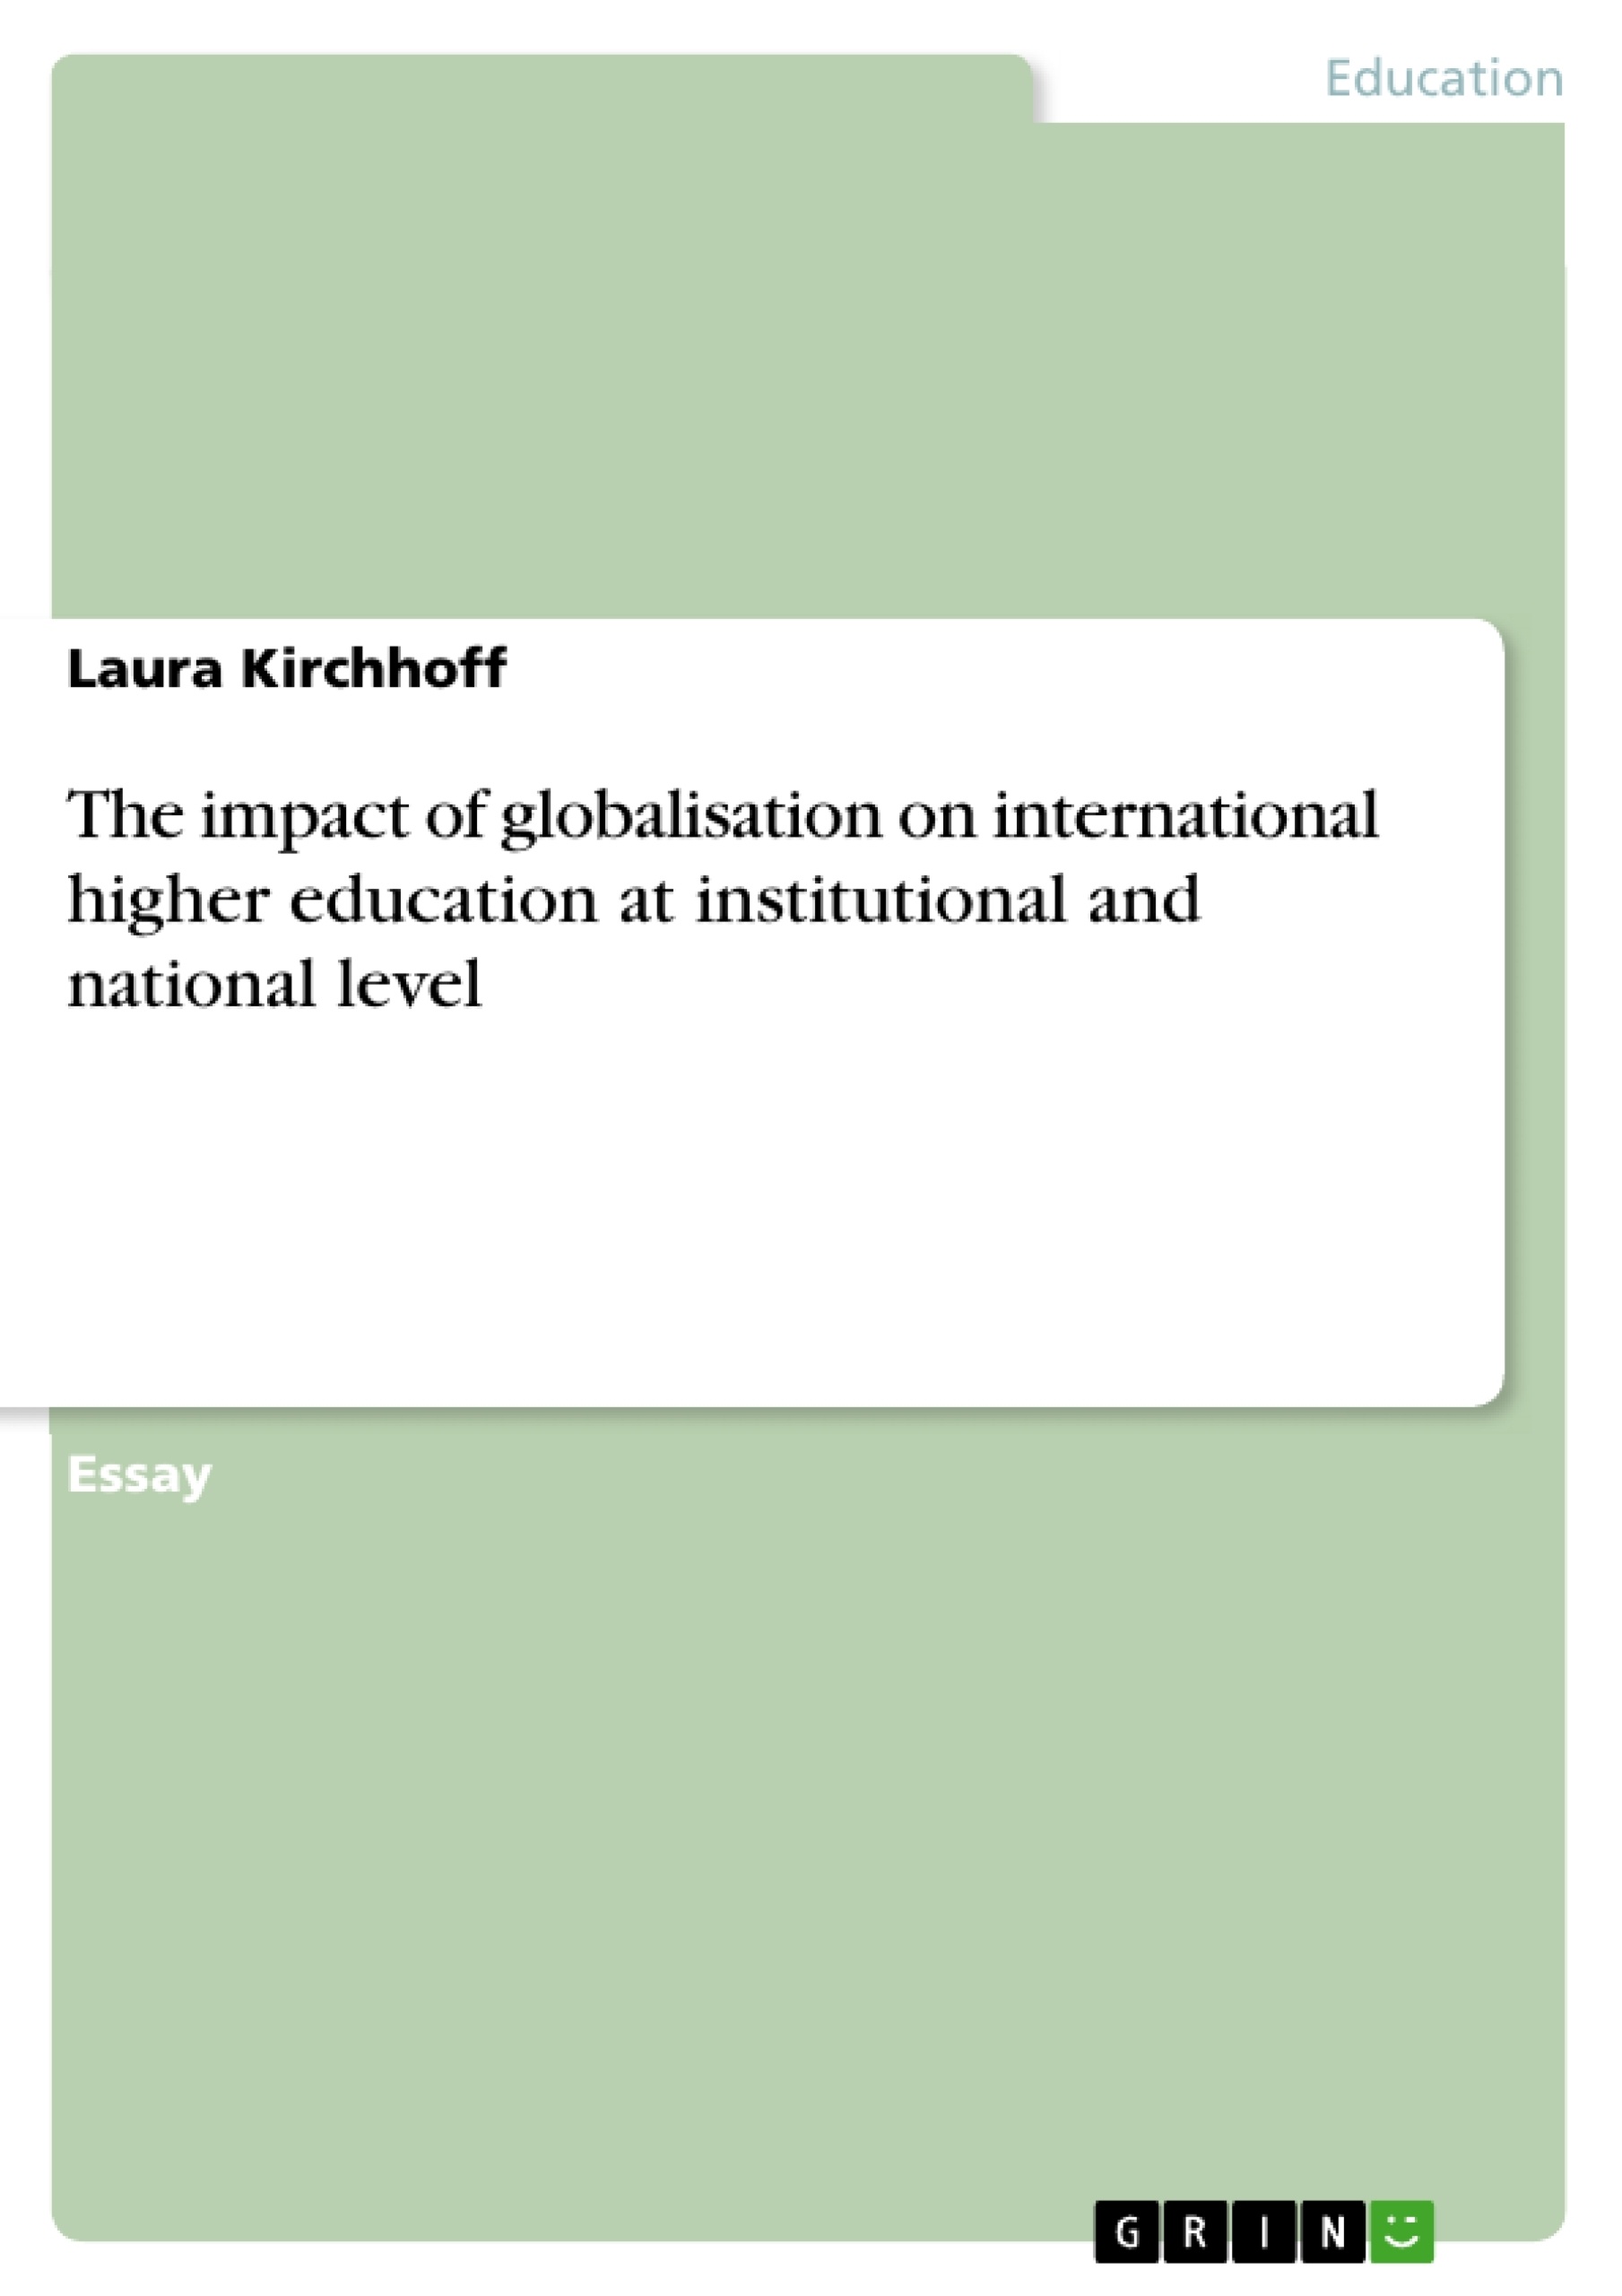 Title: The impact of globalisation on international higher education at institutional and national level